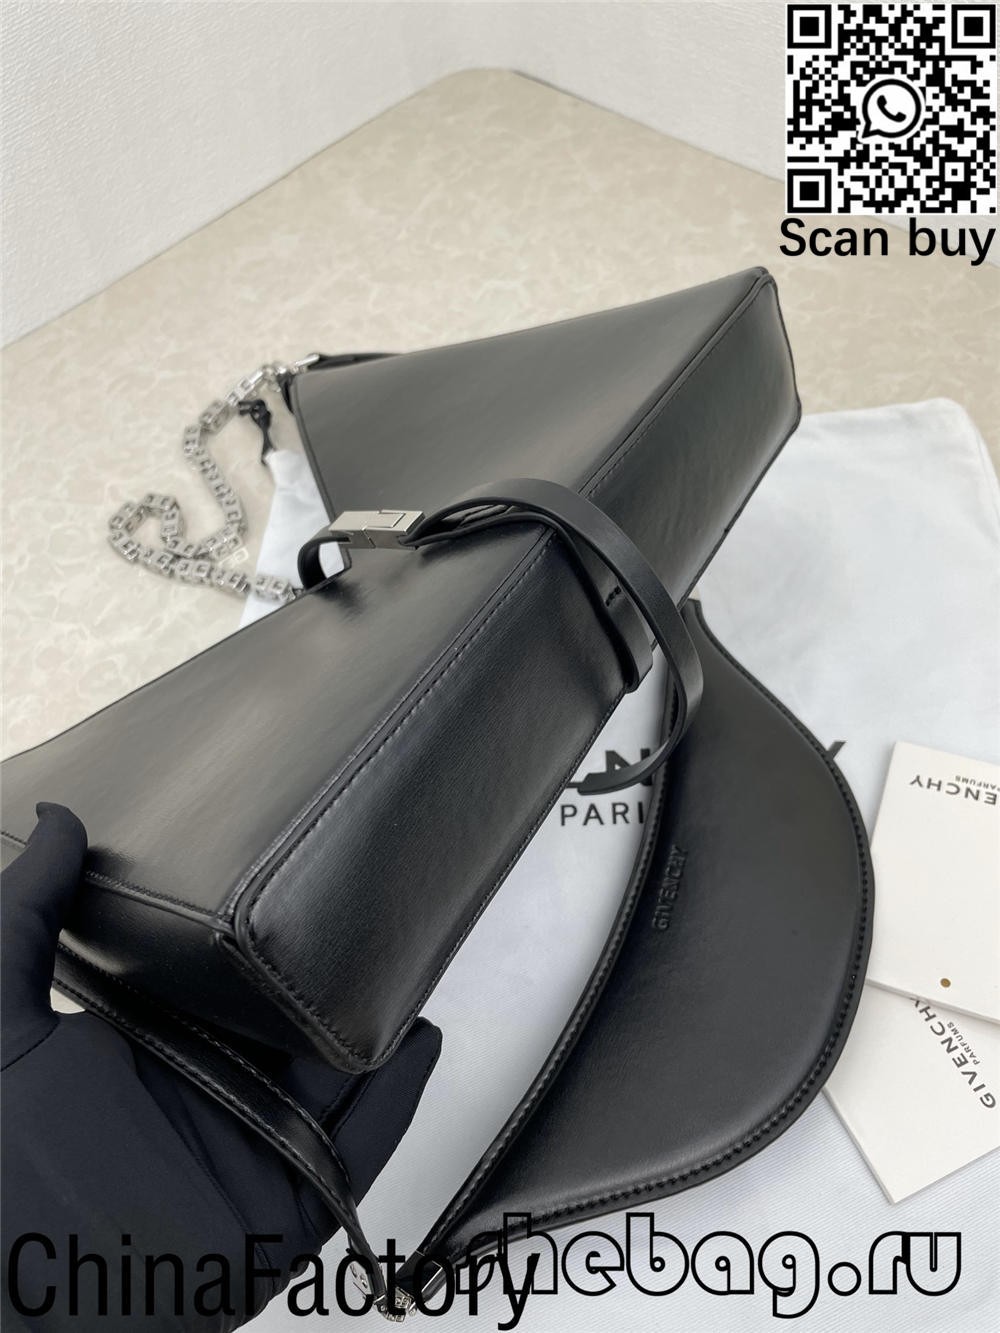 Givenchy black bag replica: Givenchy Cut-Out (2022 updated)-Best Quality Fake Louis Vuitton Bag Online Store, Replica designer bag ru